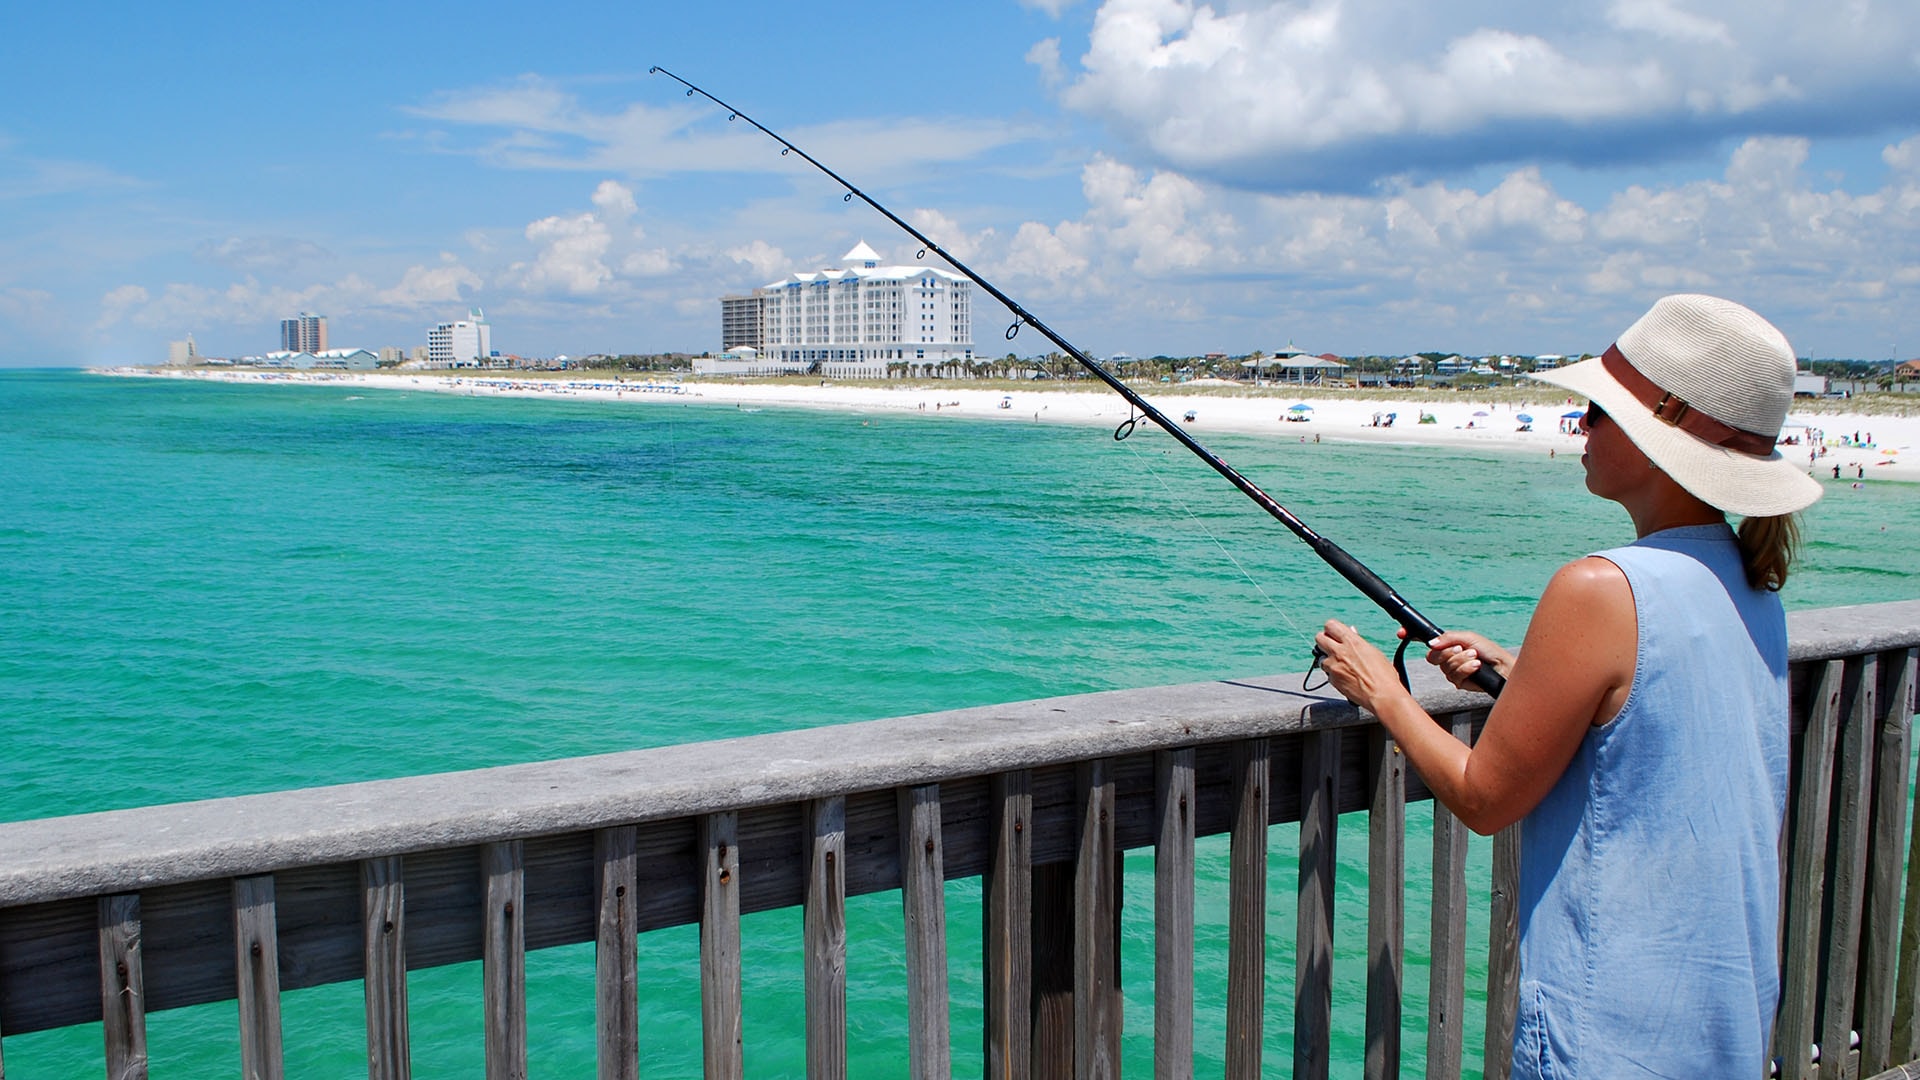 Road Trip for Florida Fishing - Pursuits with Enterprise